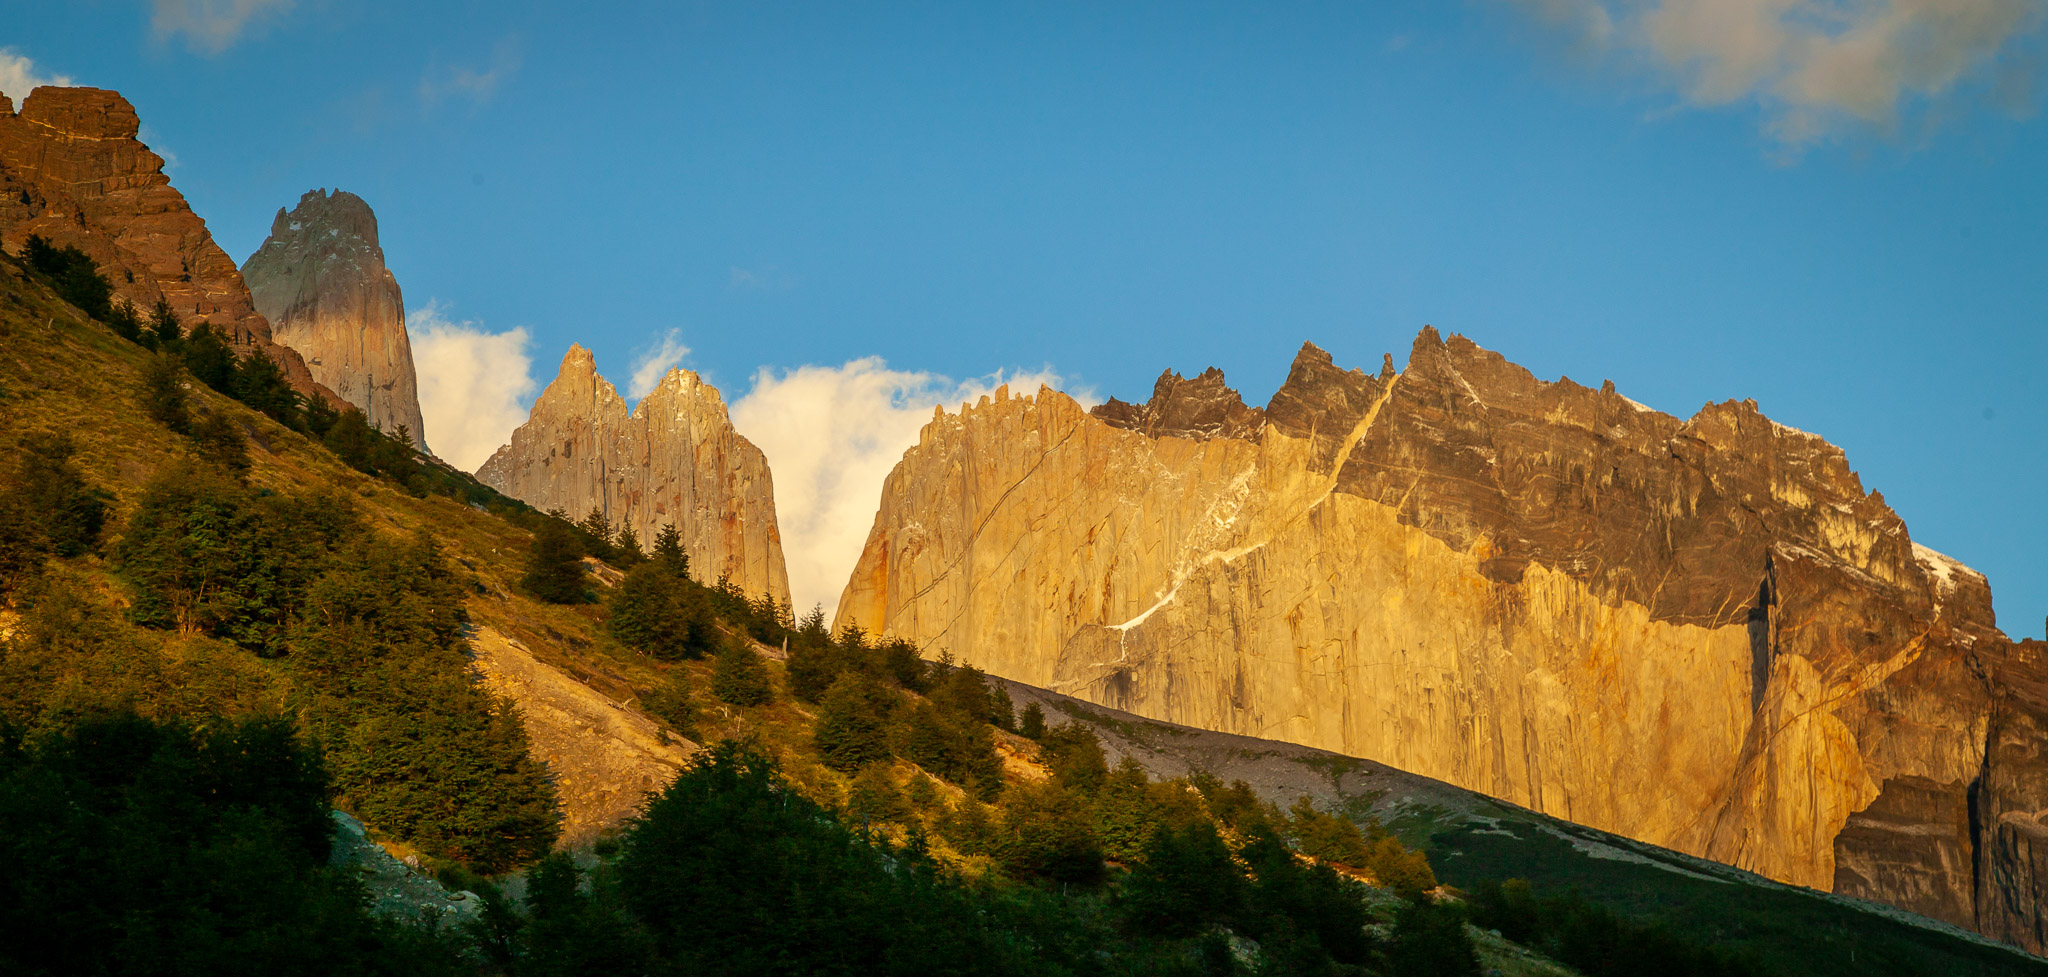 Early light on Torres del Paine